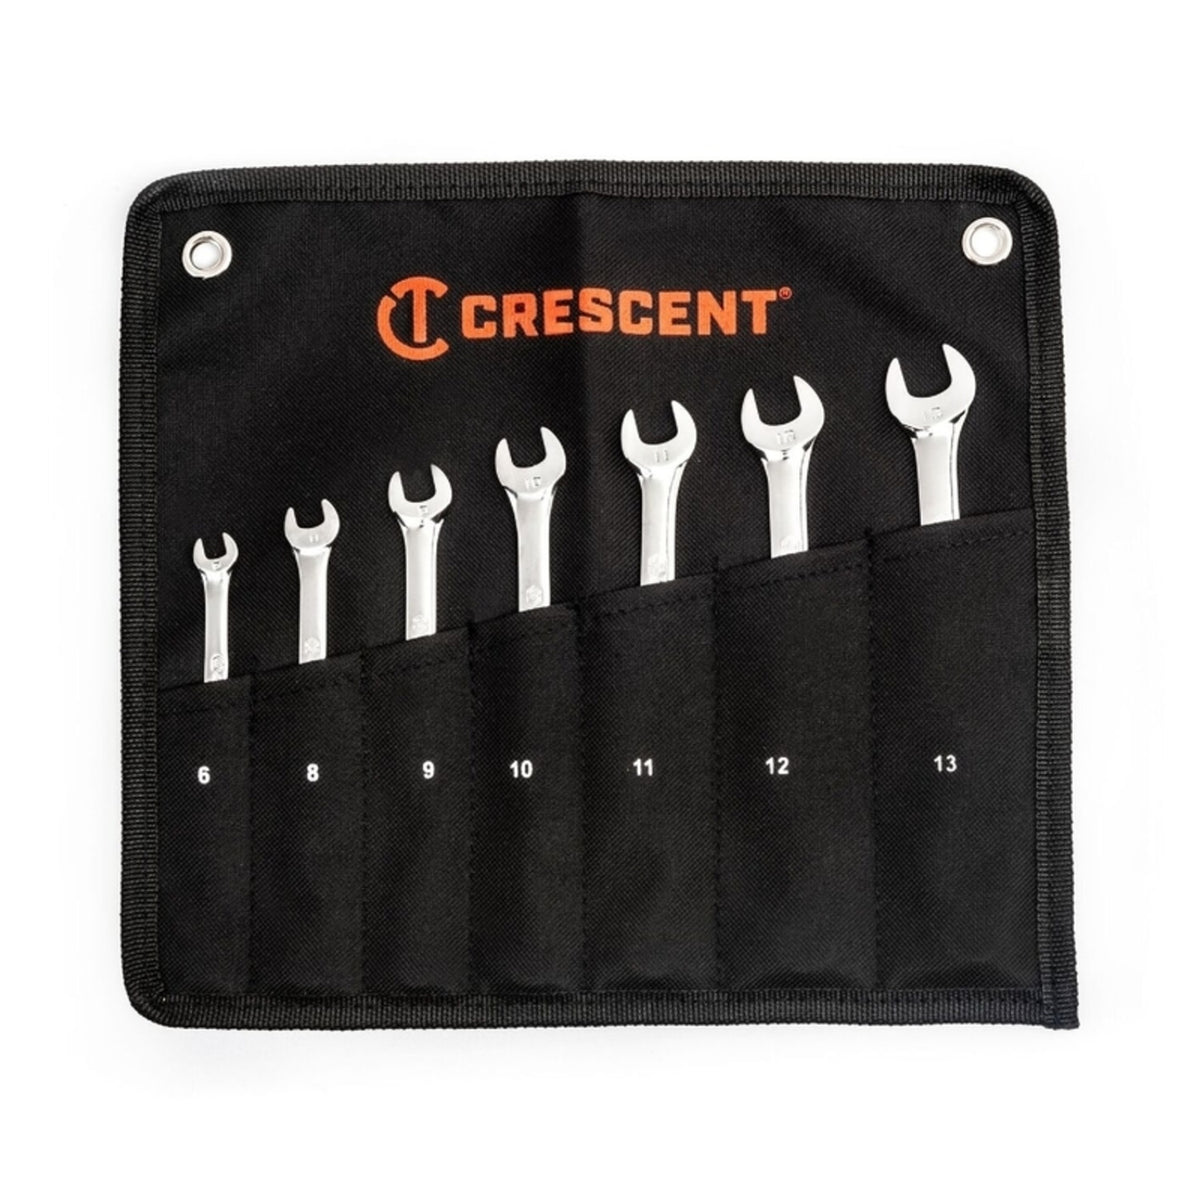 Crescent CCWSRMM7 Metric Combination Wrench Set, Silver